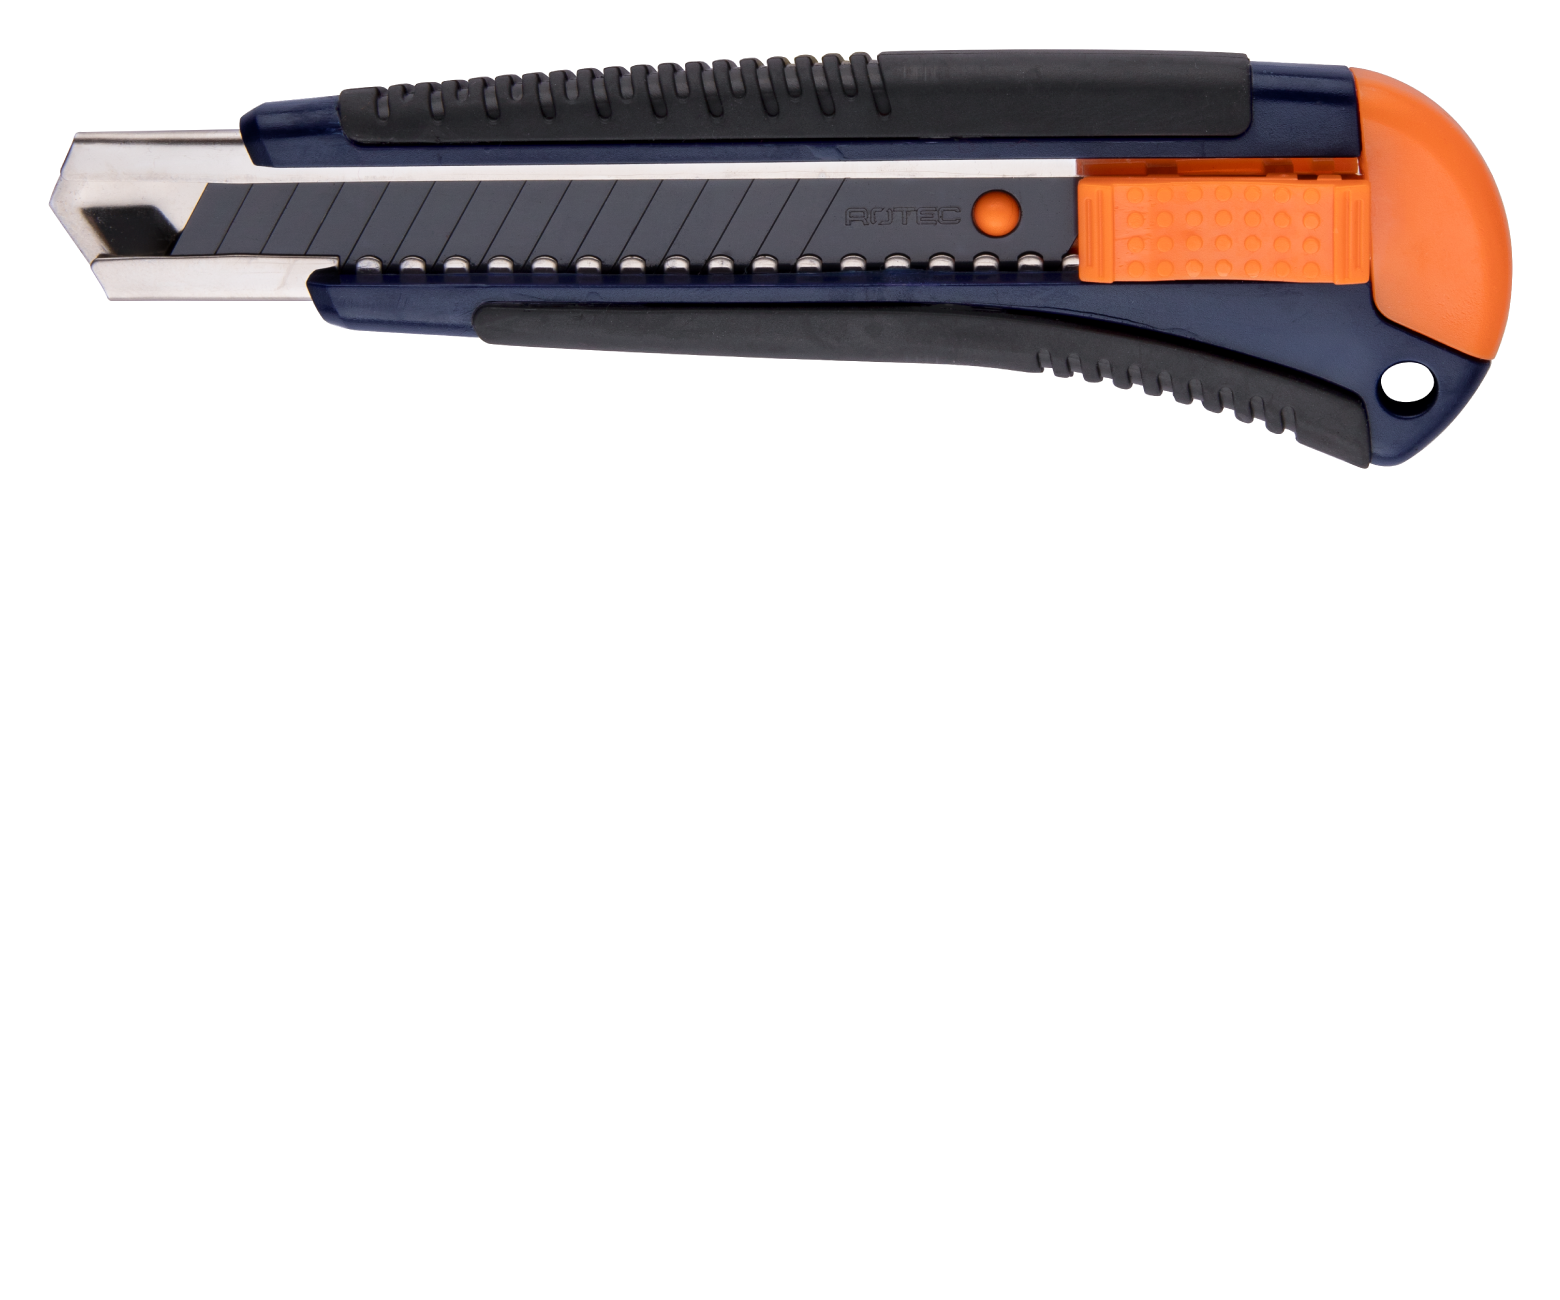 OPTI-LINE Snap-off utility knife type '456', 18 mm